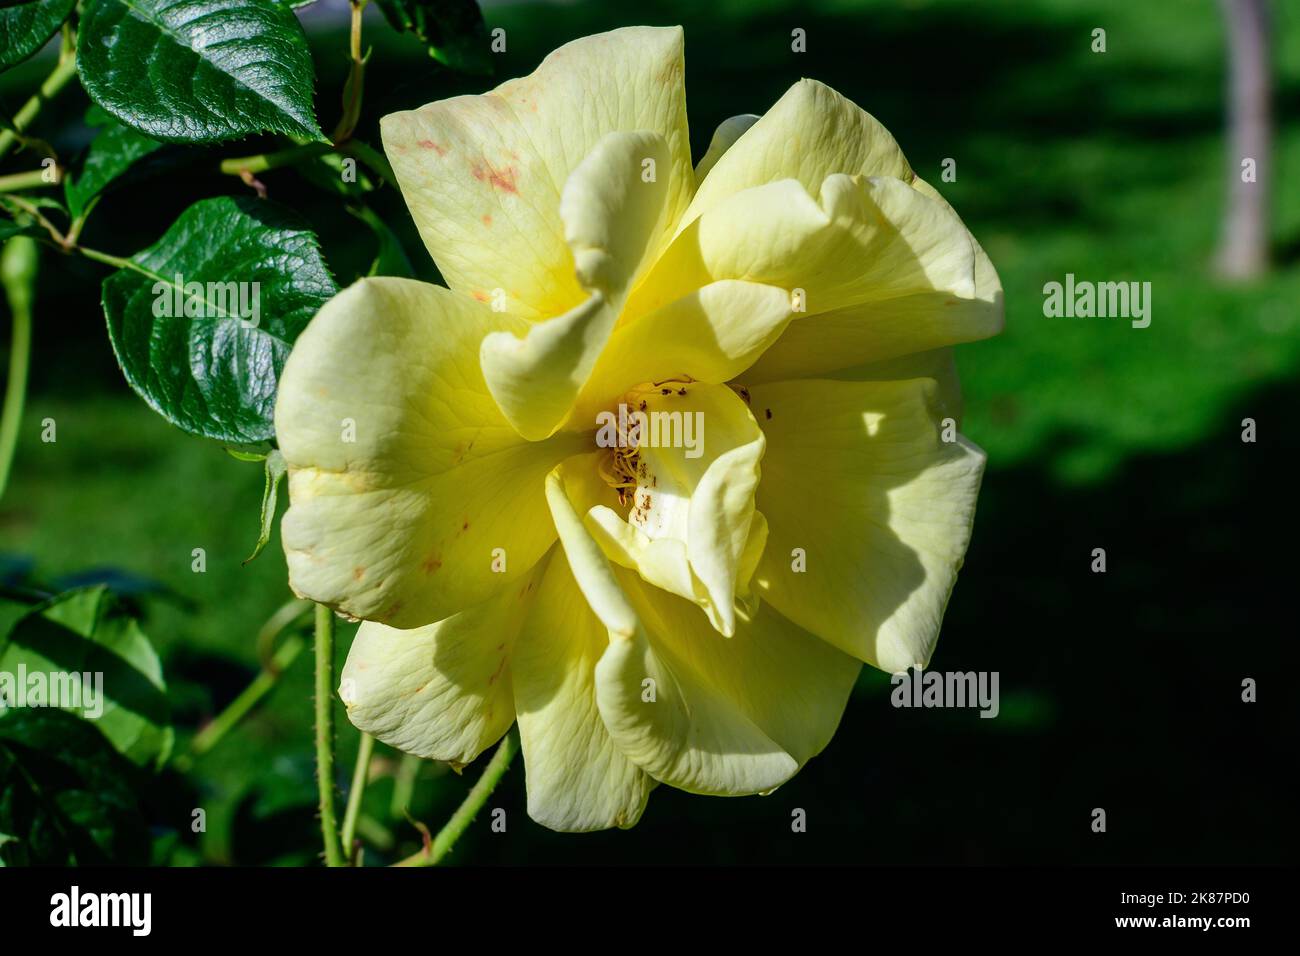 Close up on one delicate fresh vivid yellow rose and green leaves in a garden in a sunny summer day, beautiful outdoor floral background photographed Stock Photo